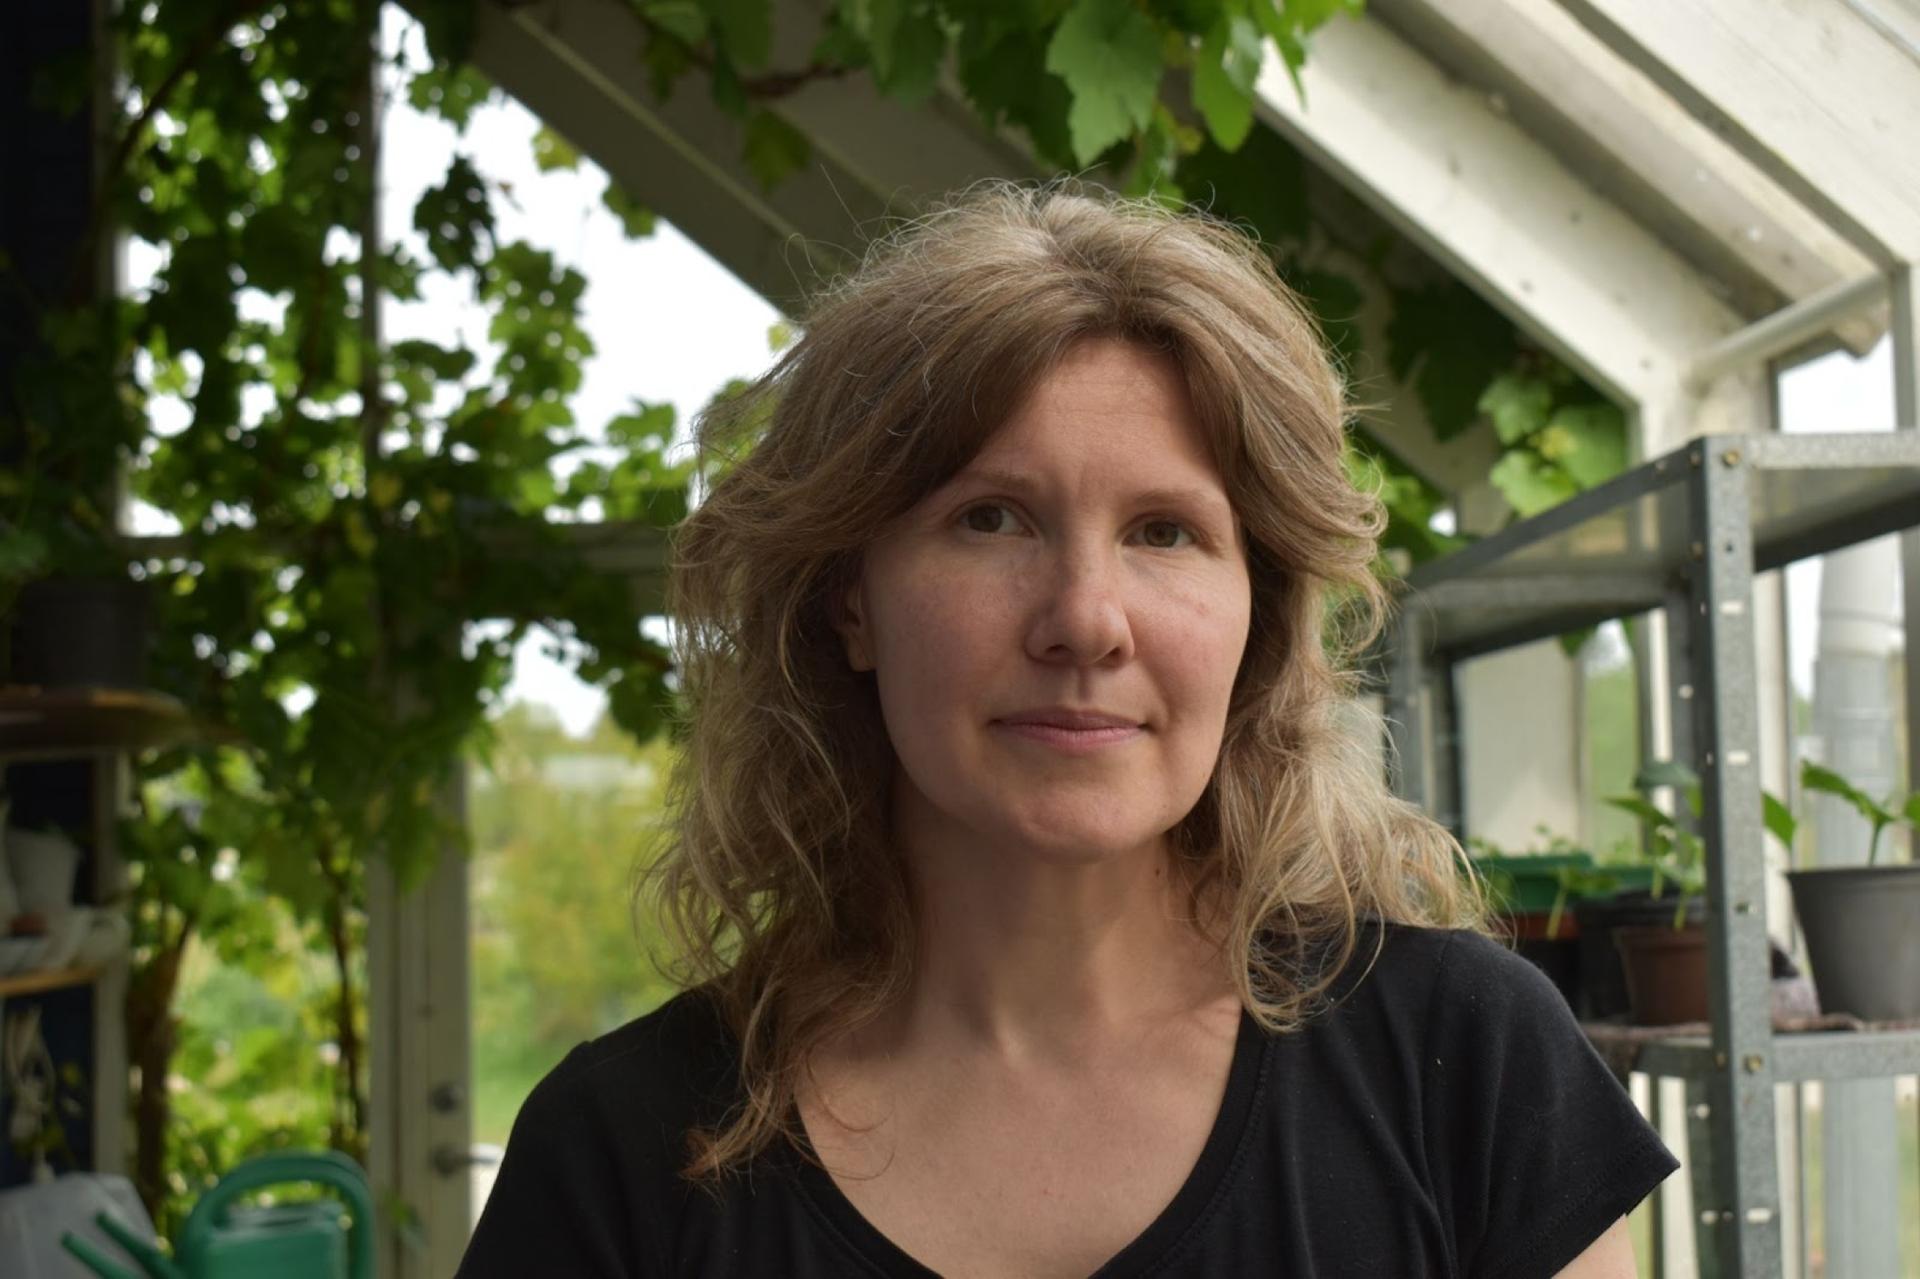 Iryna Kazakova is one of the founders and coordinators of the Green Road project. She is currently based at Hallingelille ecovillage in rural Denmark.